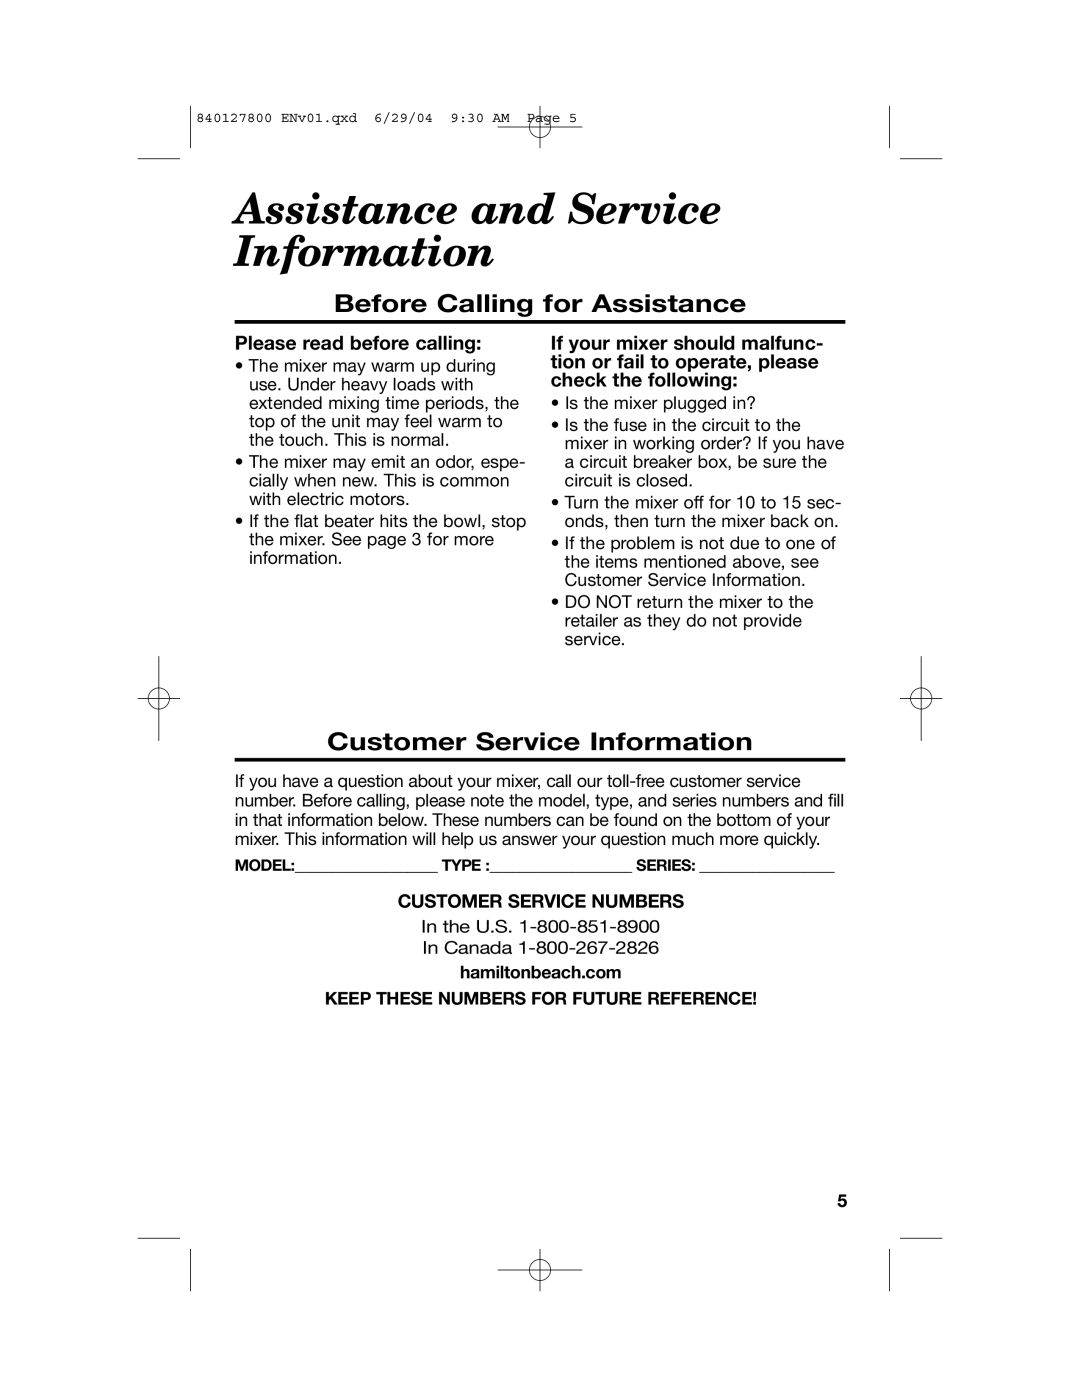 Hamilton Beach 63225 manual Assistance and Service Information, Before Calling for Assistance, Customer Service Information 